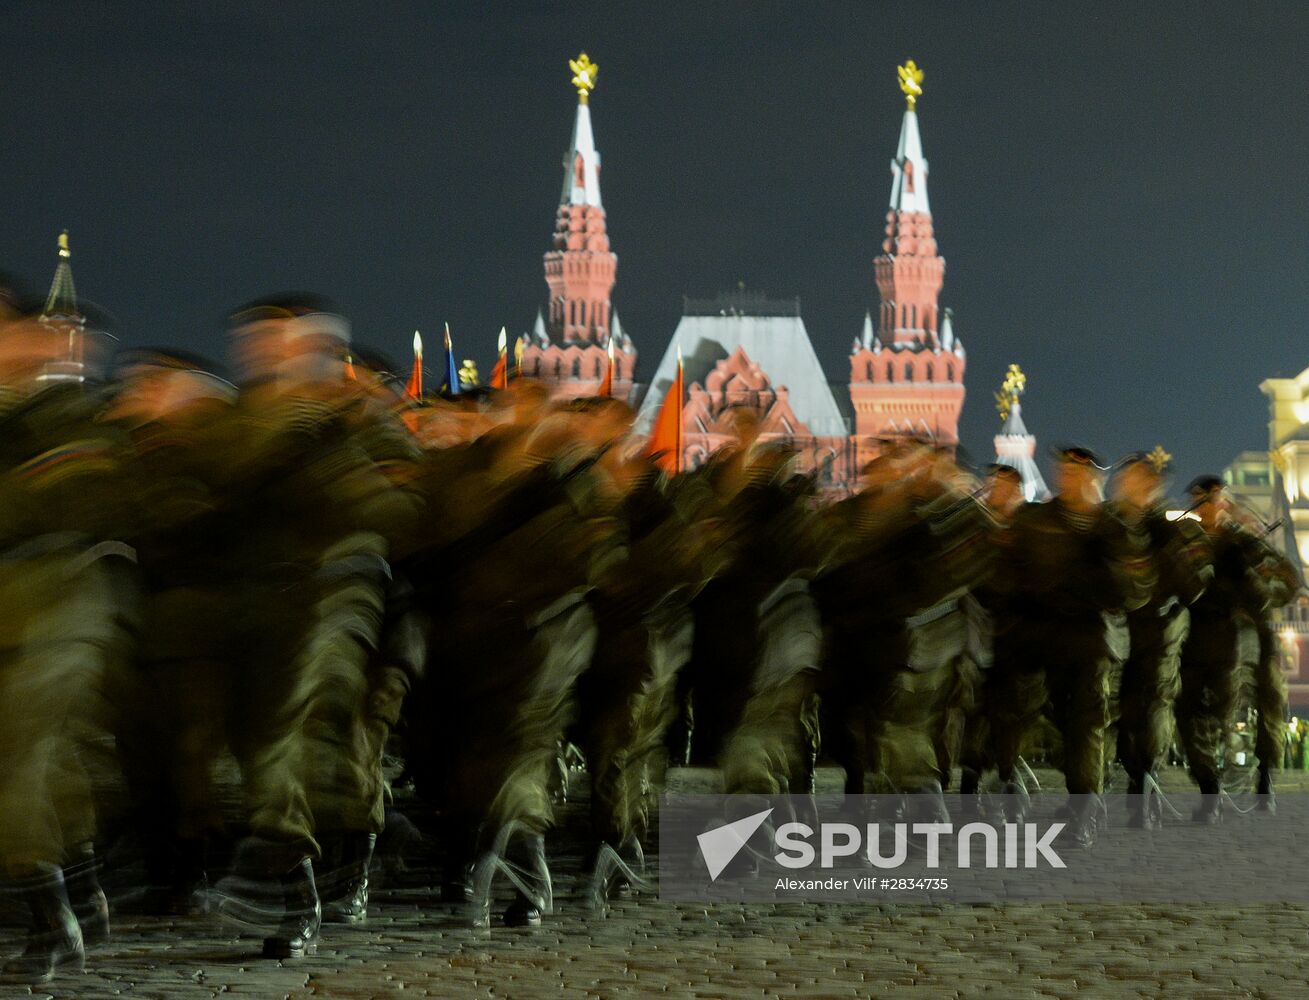 Night rehearsal of the Victory Day parade in Red Square